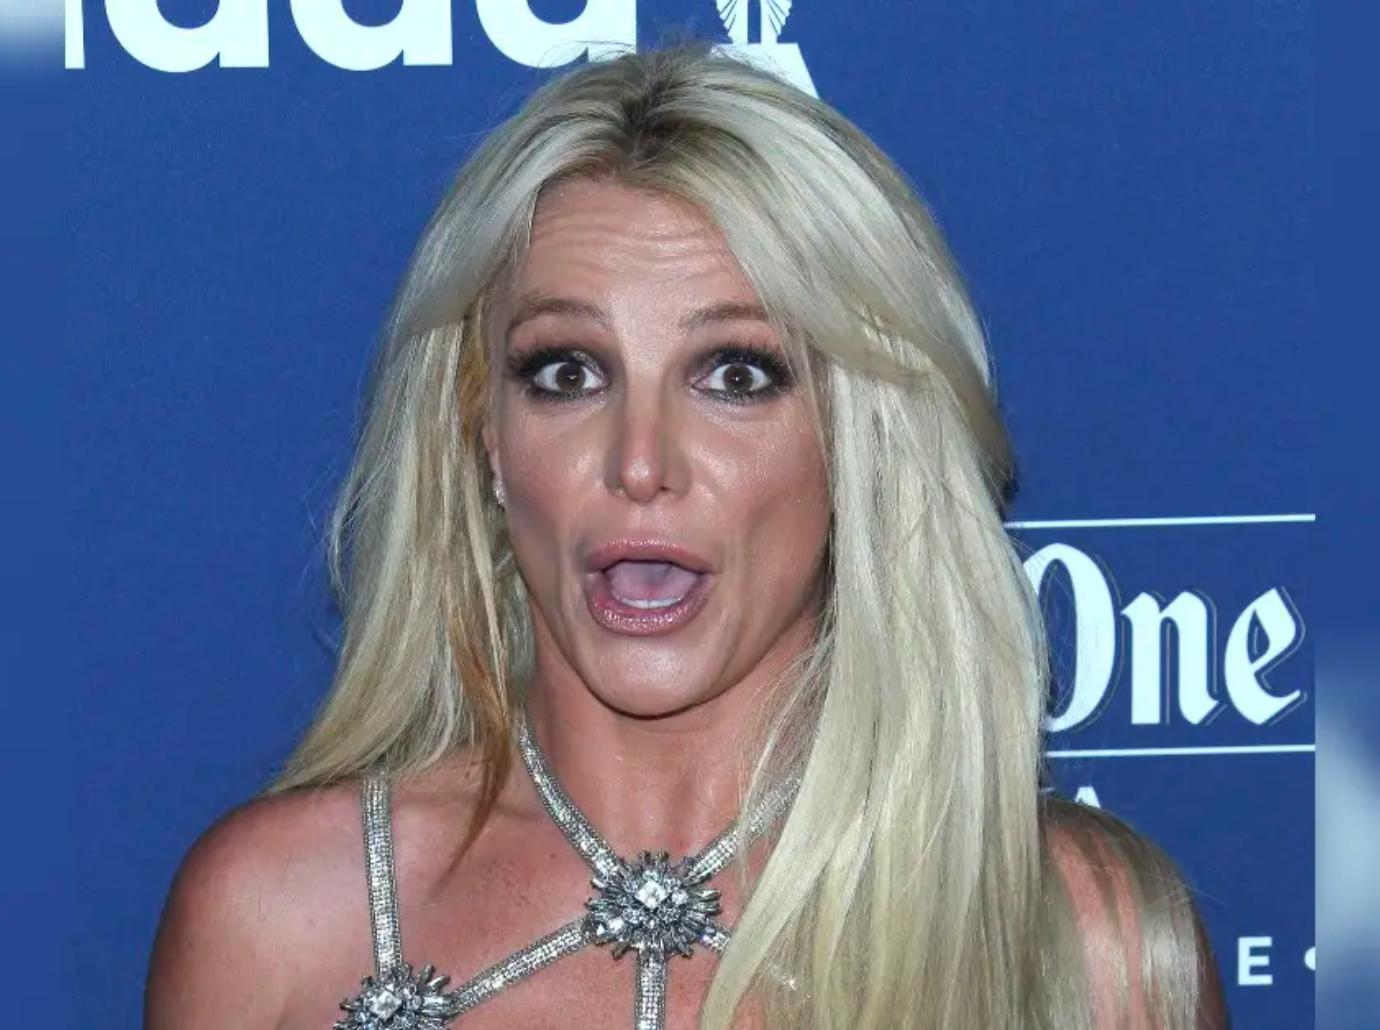 Britney Spears Shares Cryptic Message Ahead Of Tell-All Memoir Release